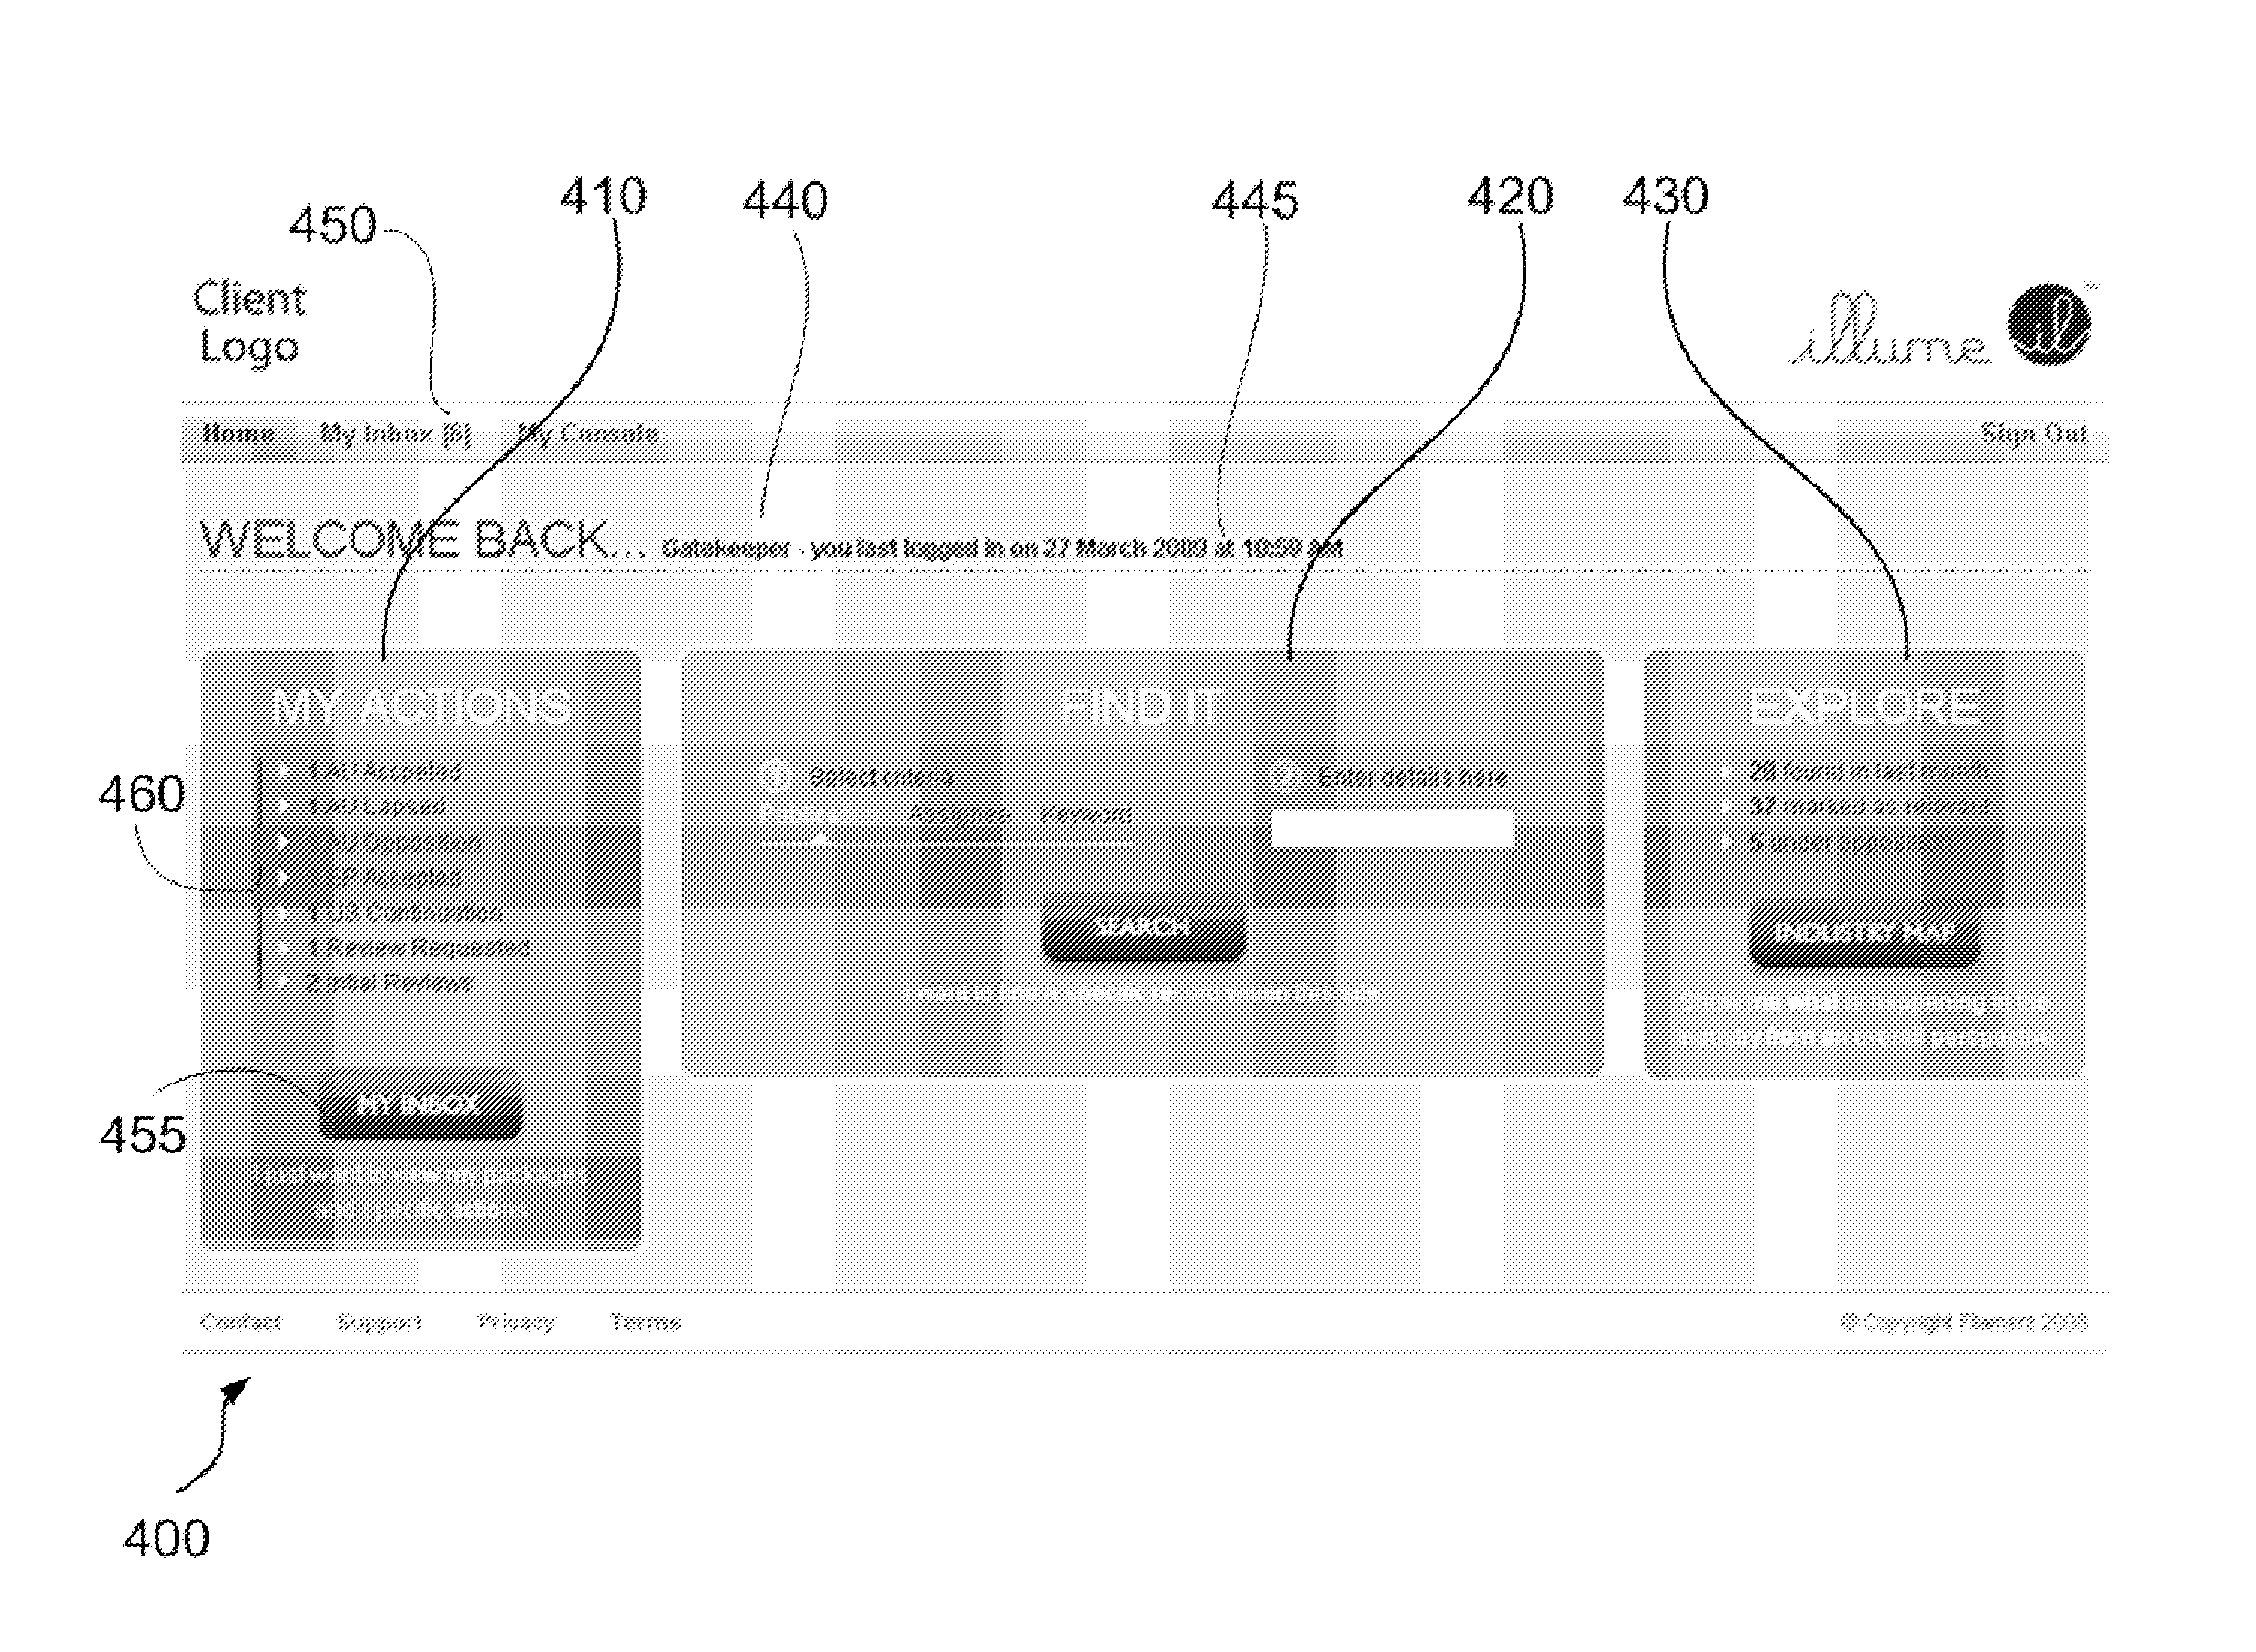 Method and System for Facilitating the Review of Electronic Documents